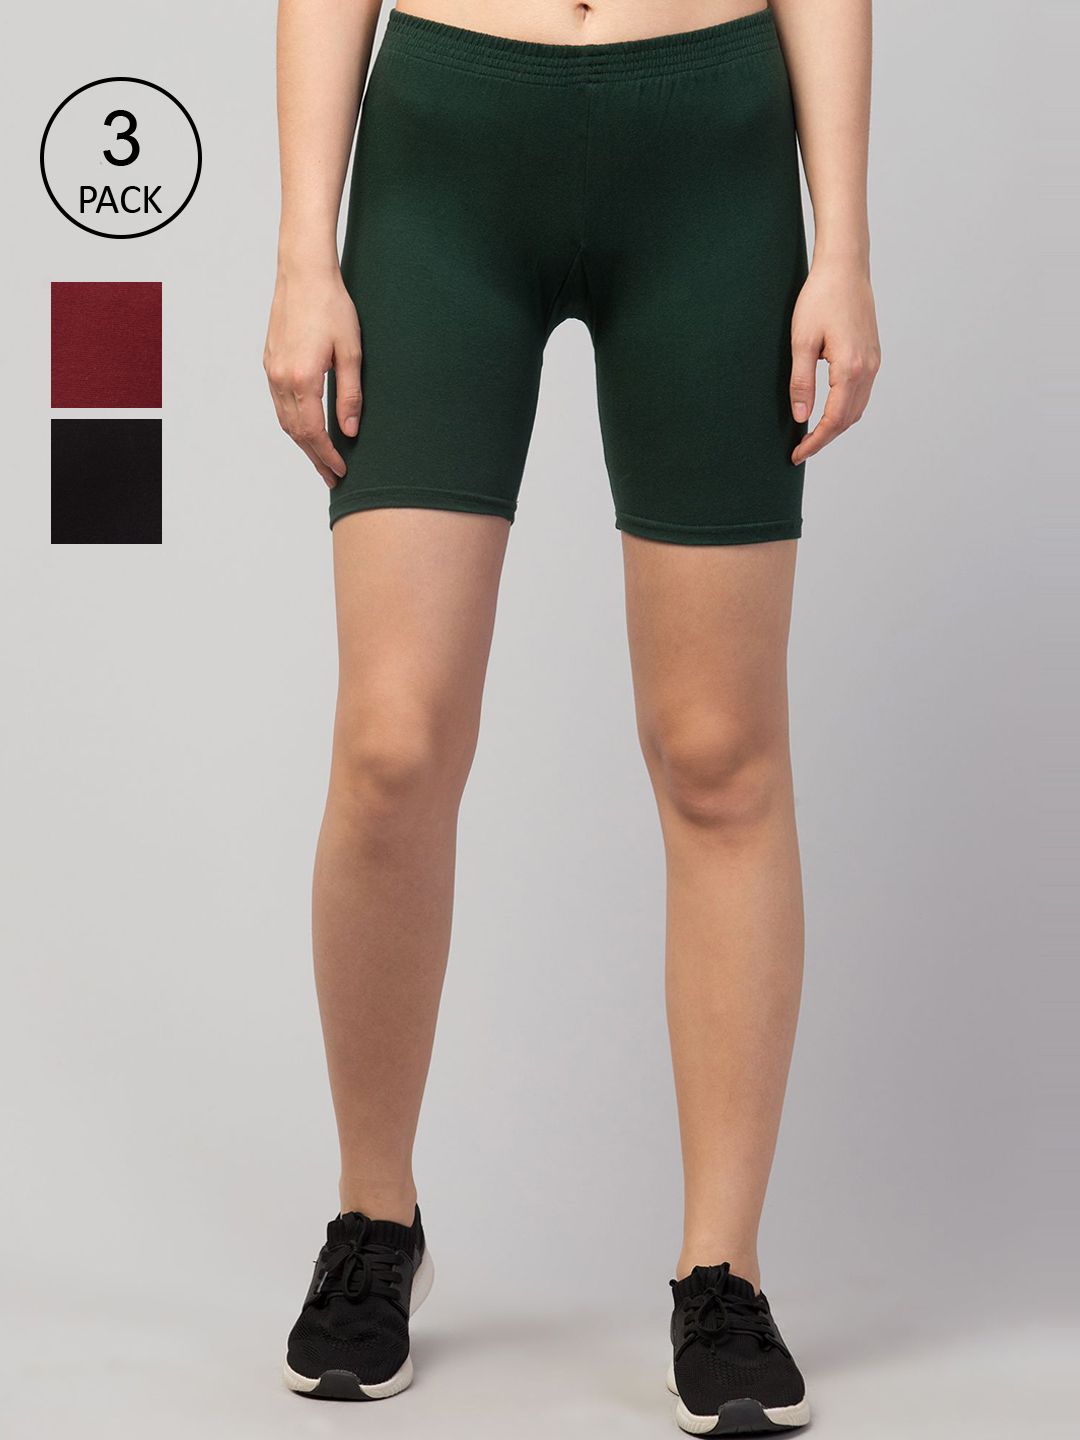 Apraa & Parma Women Pack of 3 Green & Maroon Slim Fit Cycling Shorts Price in India